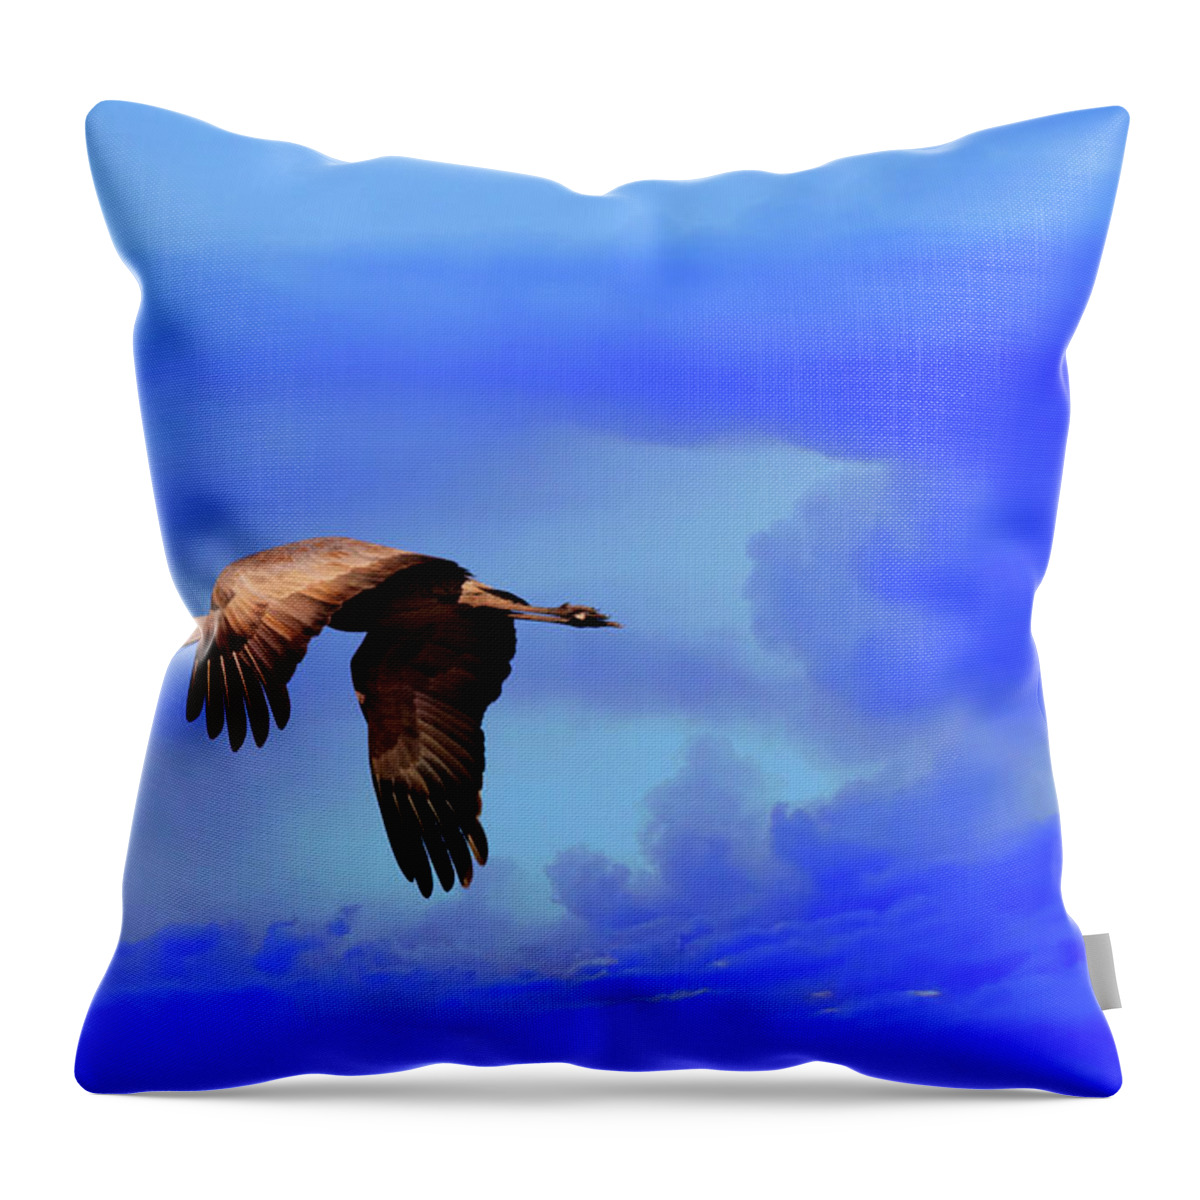 Wildlife Throw Pillow featuring the photograph Against The Storm by Robert Harris